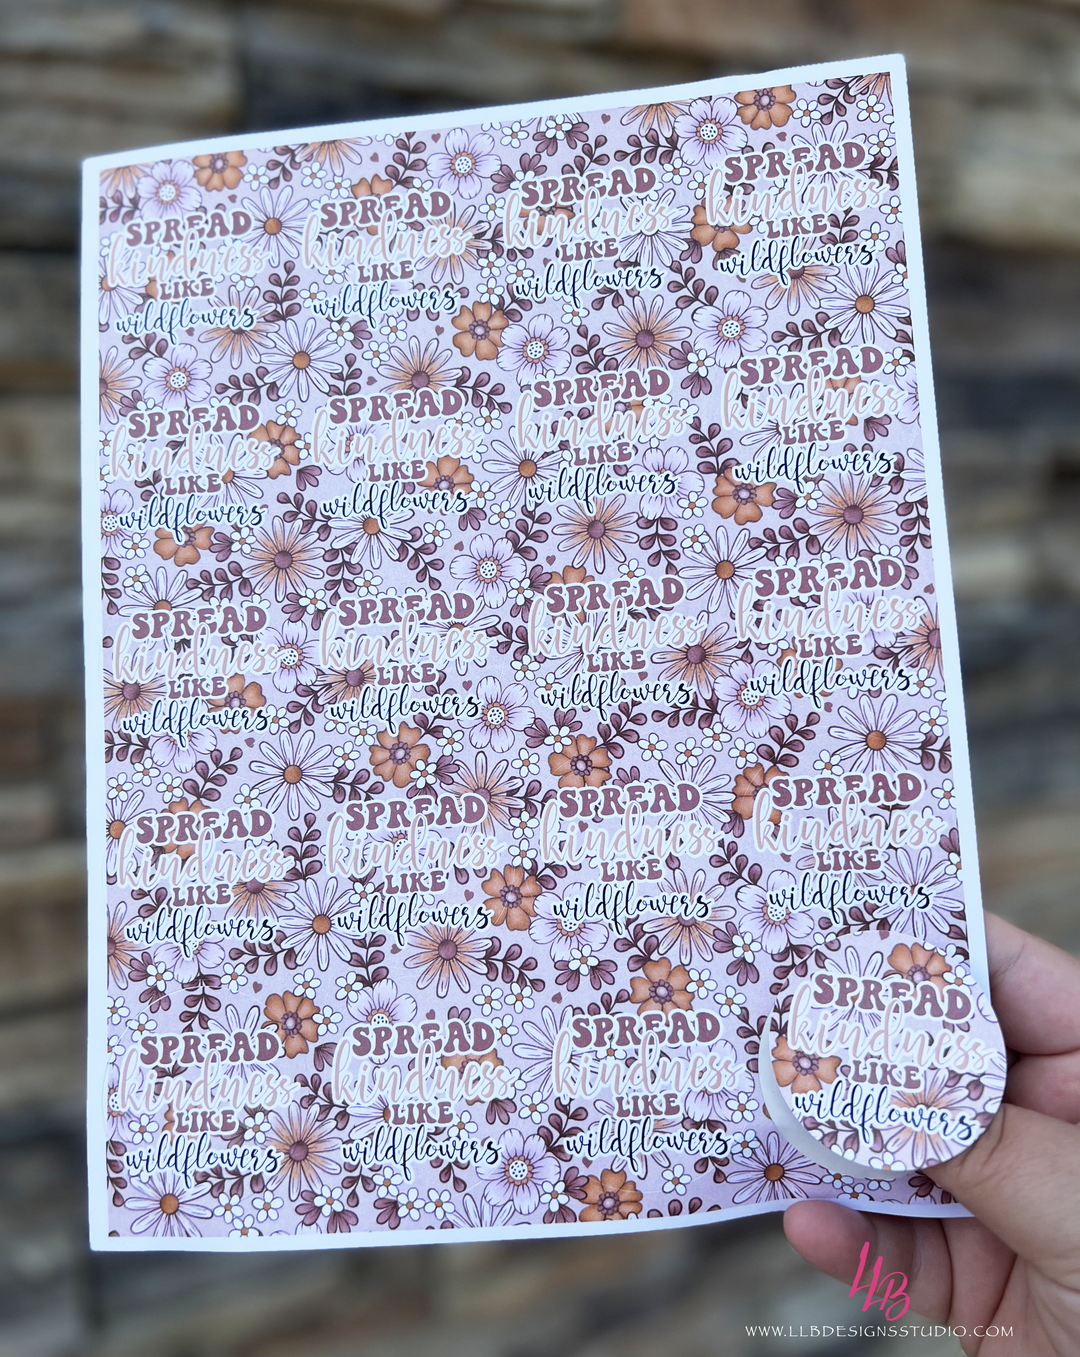 Spread Kindness Like Wildflowers |  Packaging Stickers | Business Branding | Small Shop Stickers | Sticker #: S0421 | Ready To Ship